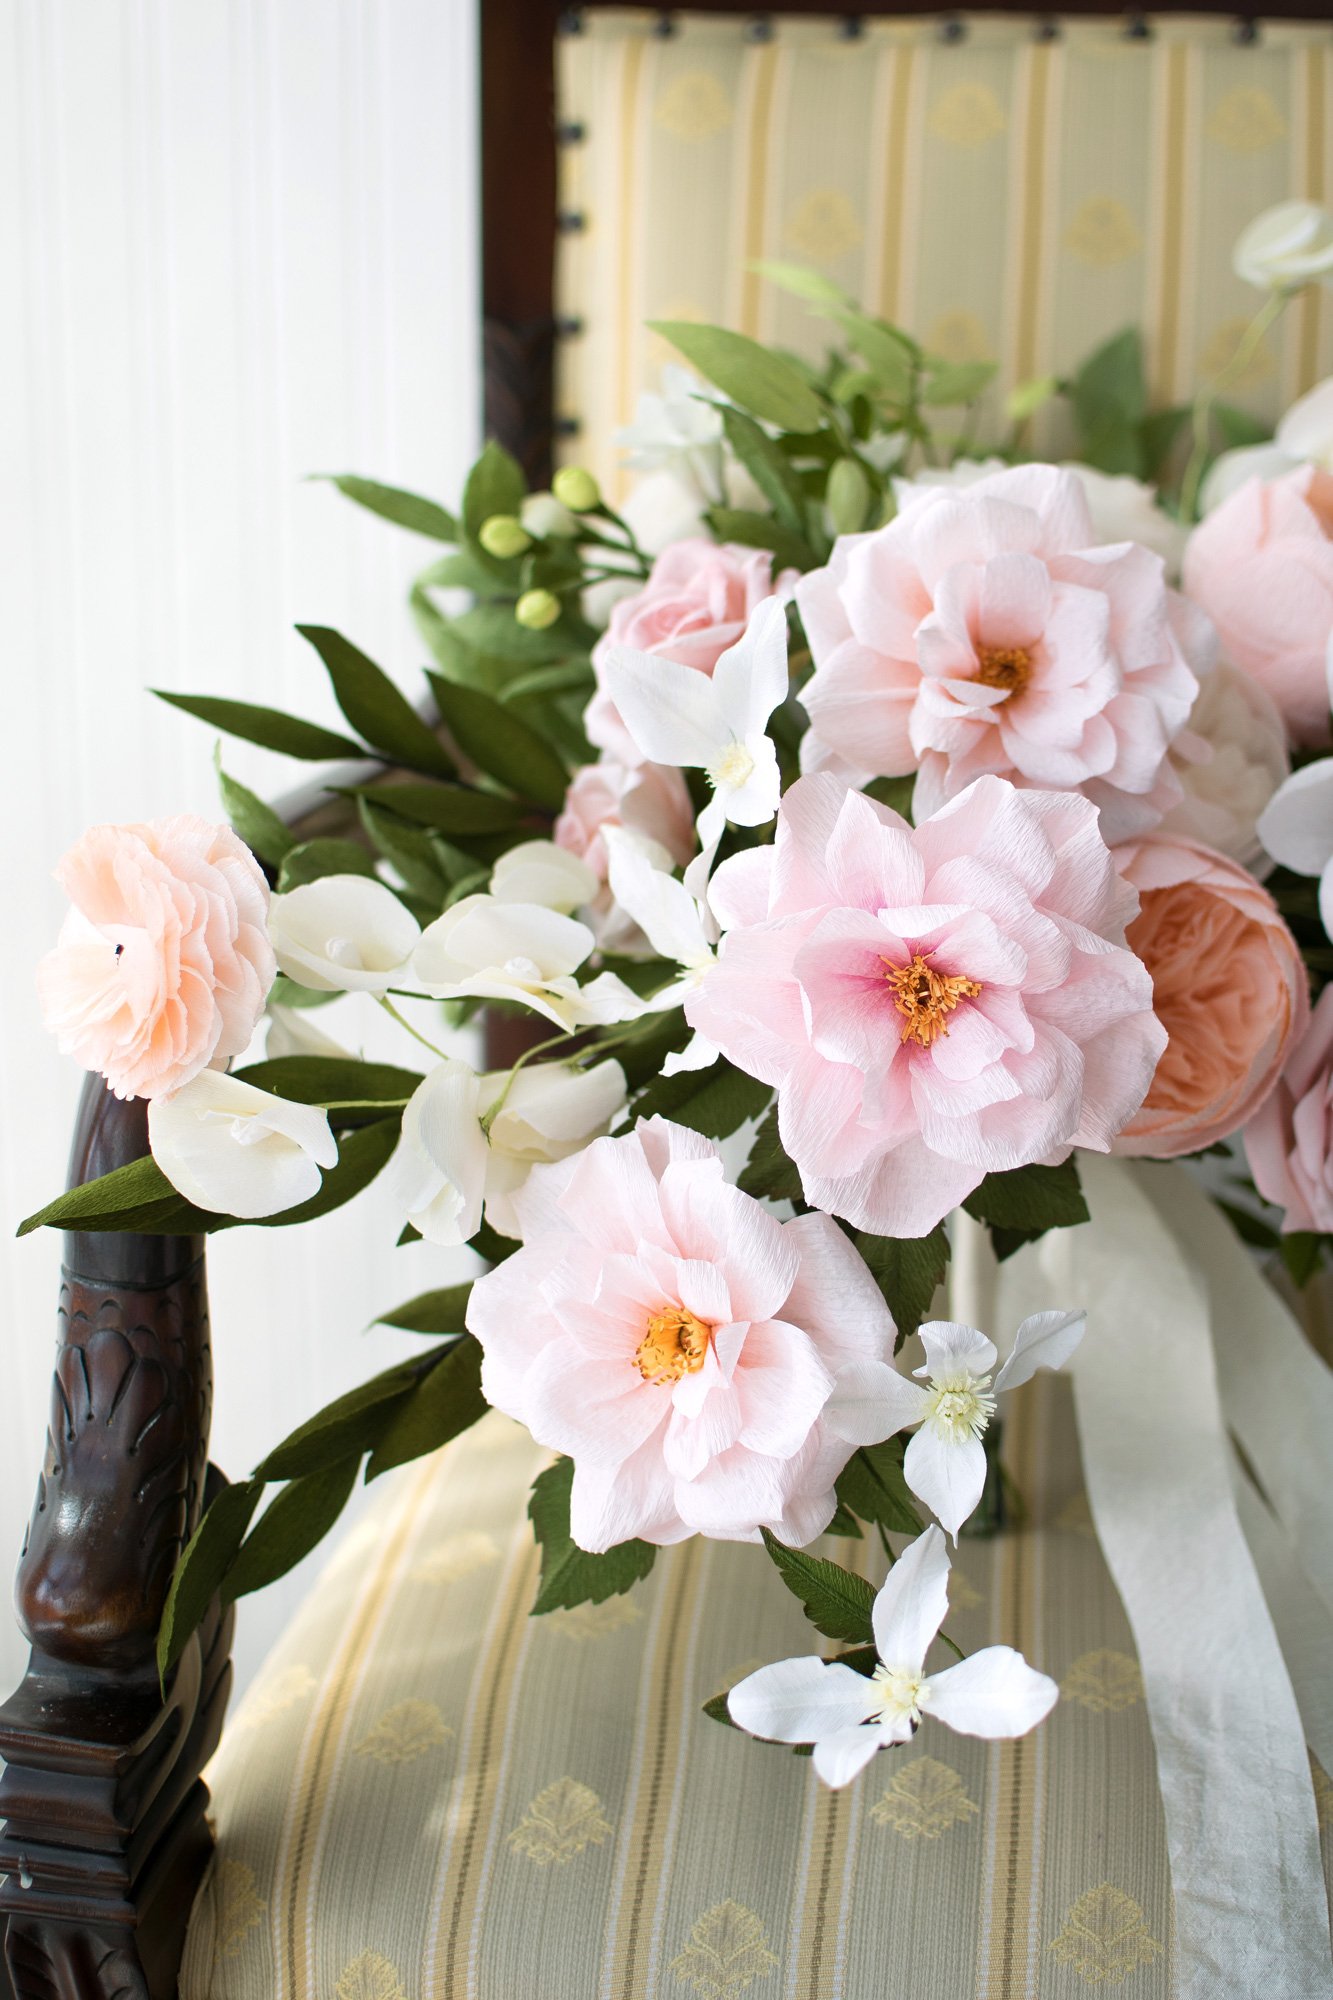 Pink-Blush-Paper-Flower-Bouquet-by-Crafted-To-Bloom-left-side-paperflowers-craftedtobloom.jpg